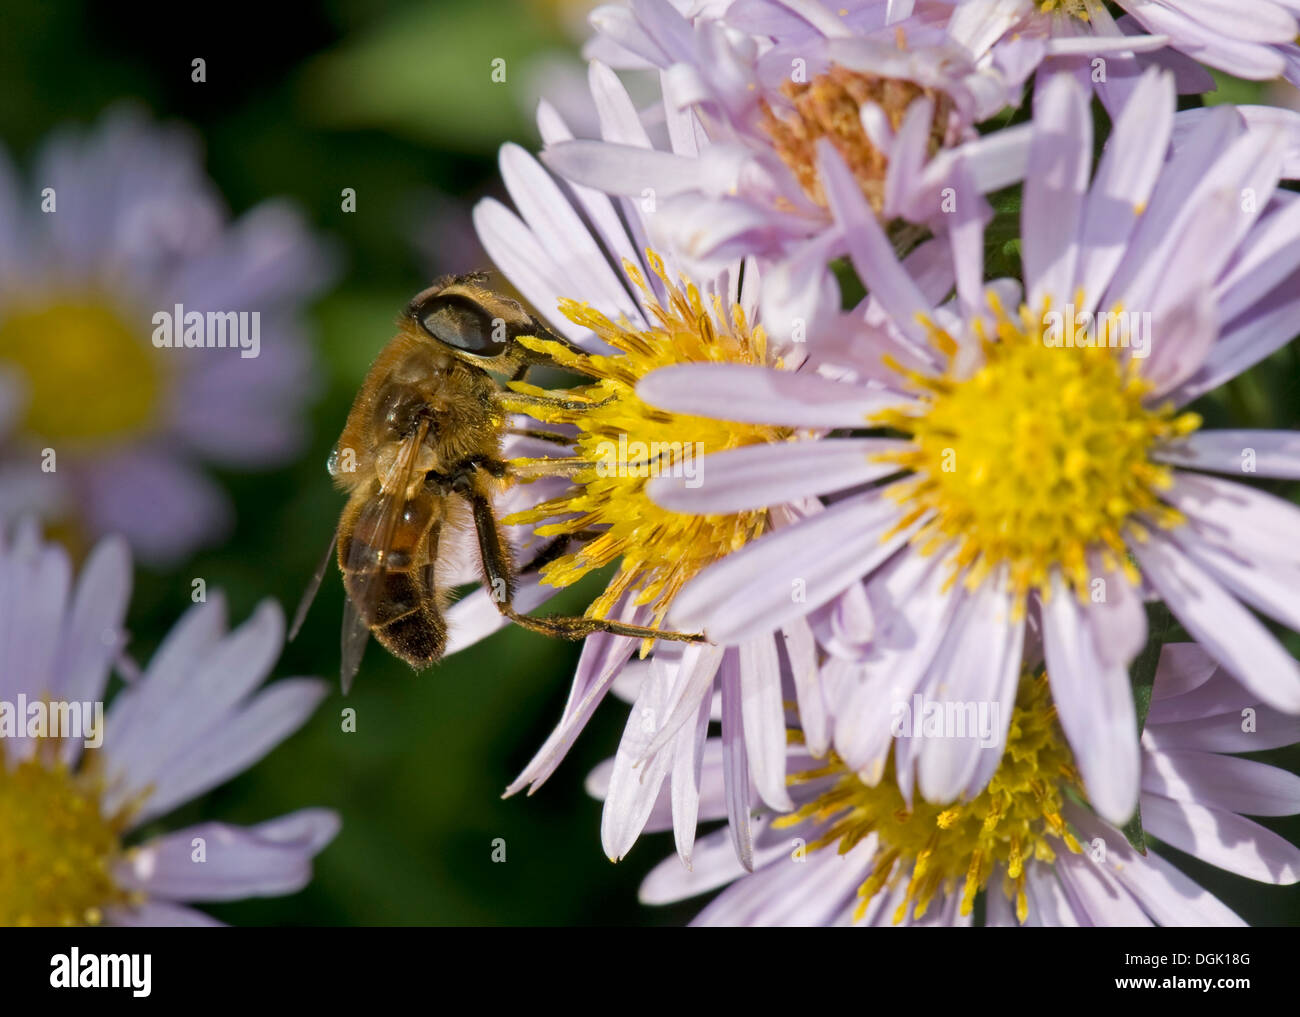 Drone fly, Eristalis tenax, taking nectar from a michaelmas daisy, Aster spp., flower in autumn Stock Photo